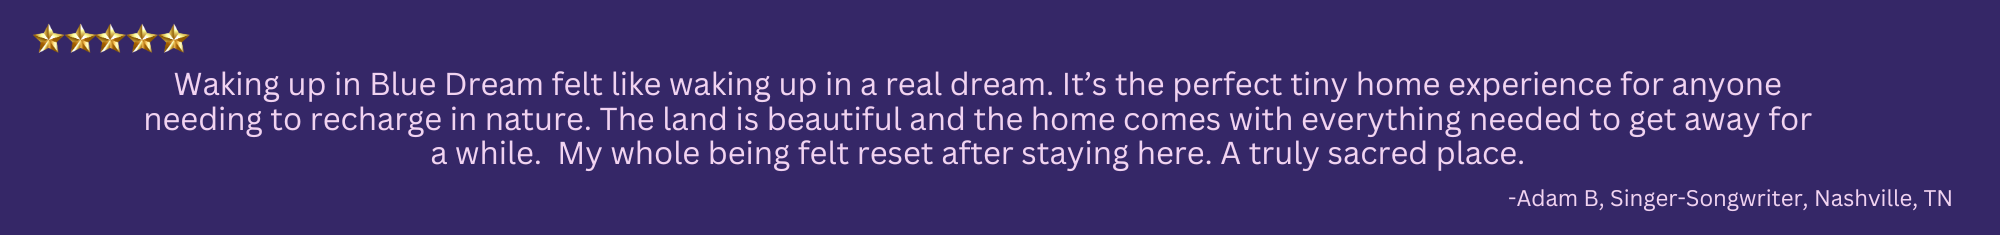 Blue Dream Quote 1.png